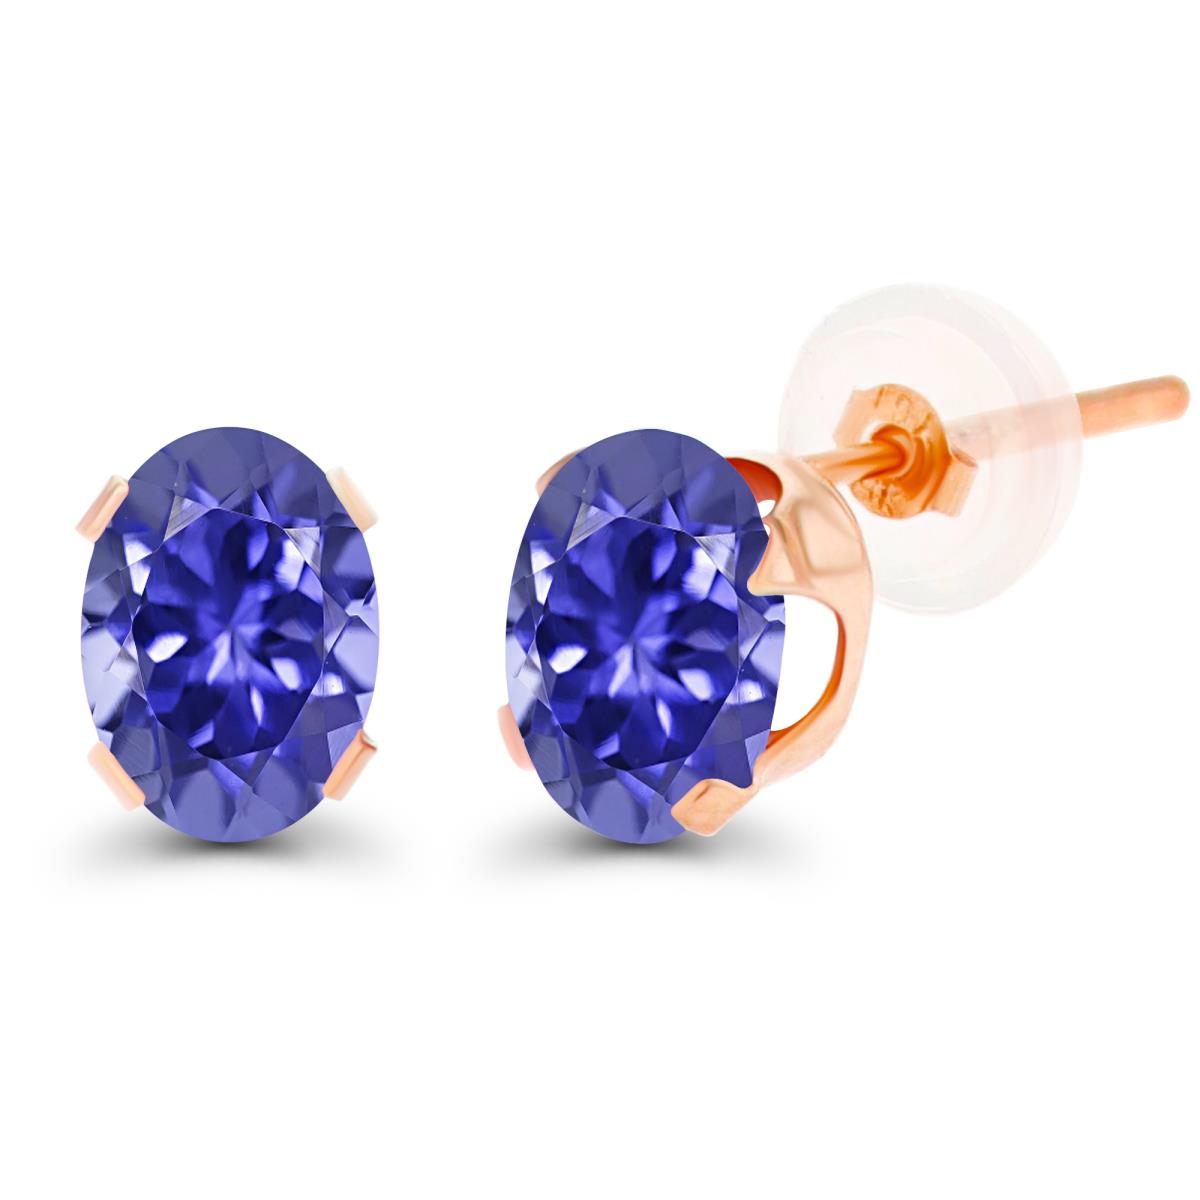 10K Rose Gold 7x5mm Oval Tanzanite Stud Earring with Silicone Back